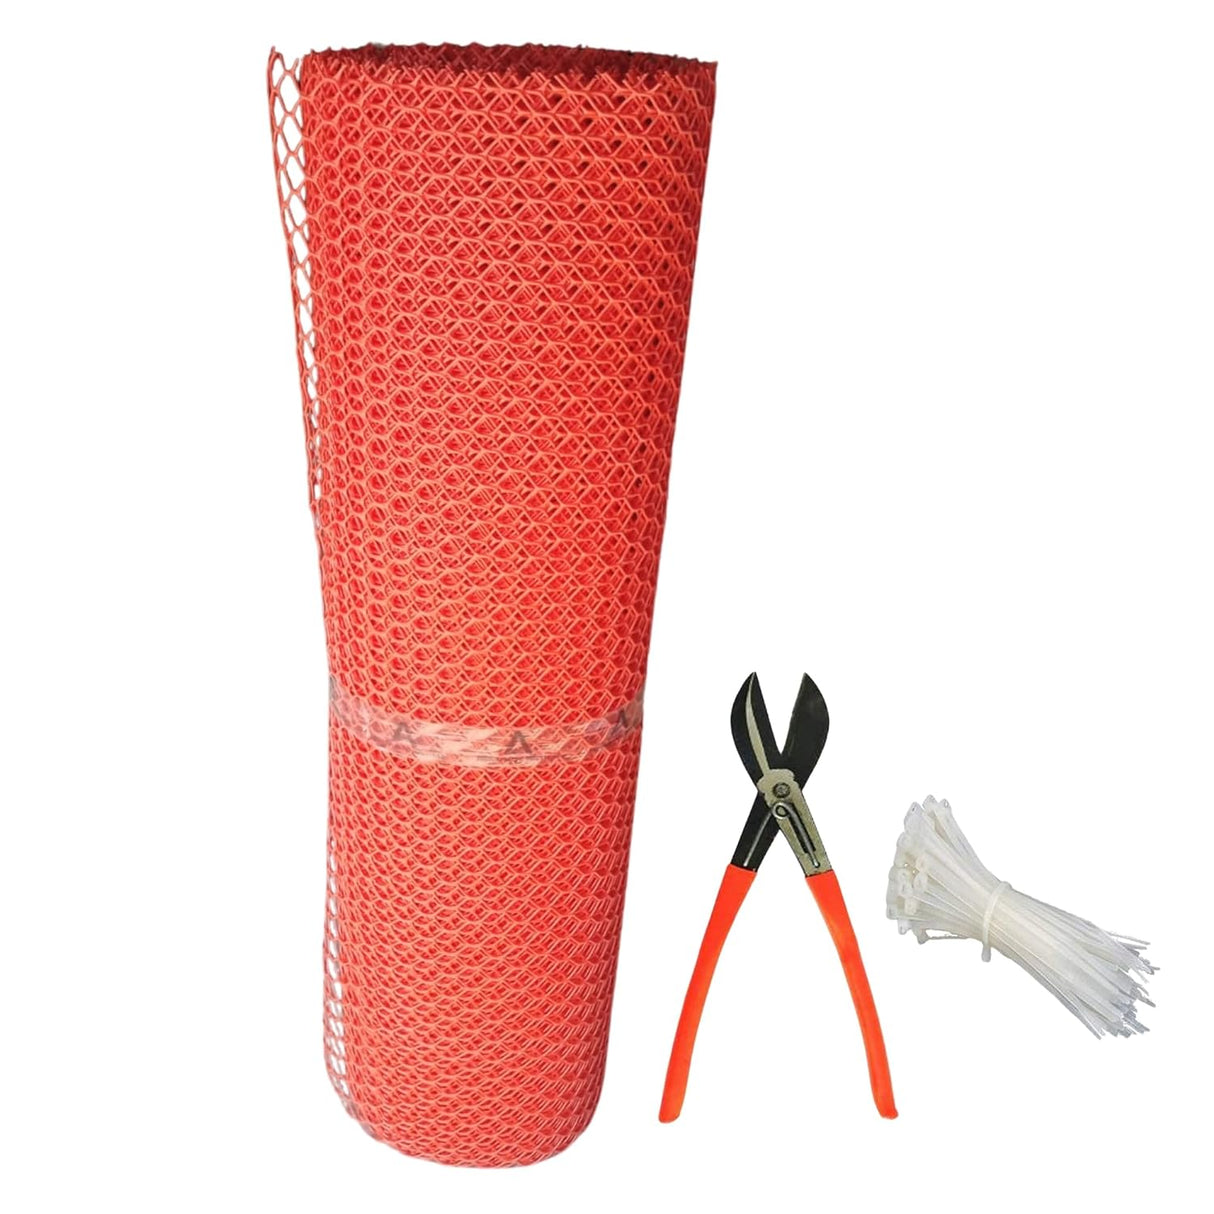 Singhal Tree Guard Net, Garden Fencing Net Virgin Plastic Red Color with 1 Cutter and 50 PVC Tags (4 x 10 Ft)